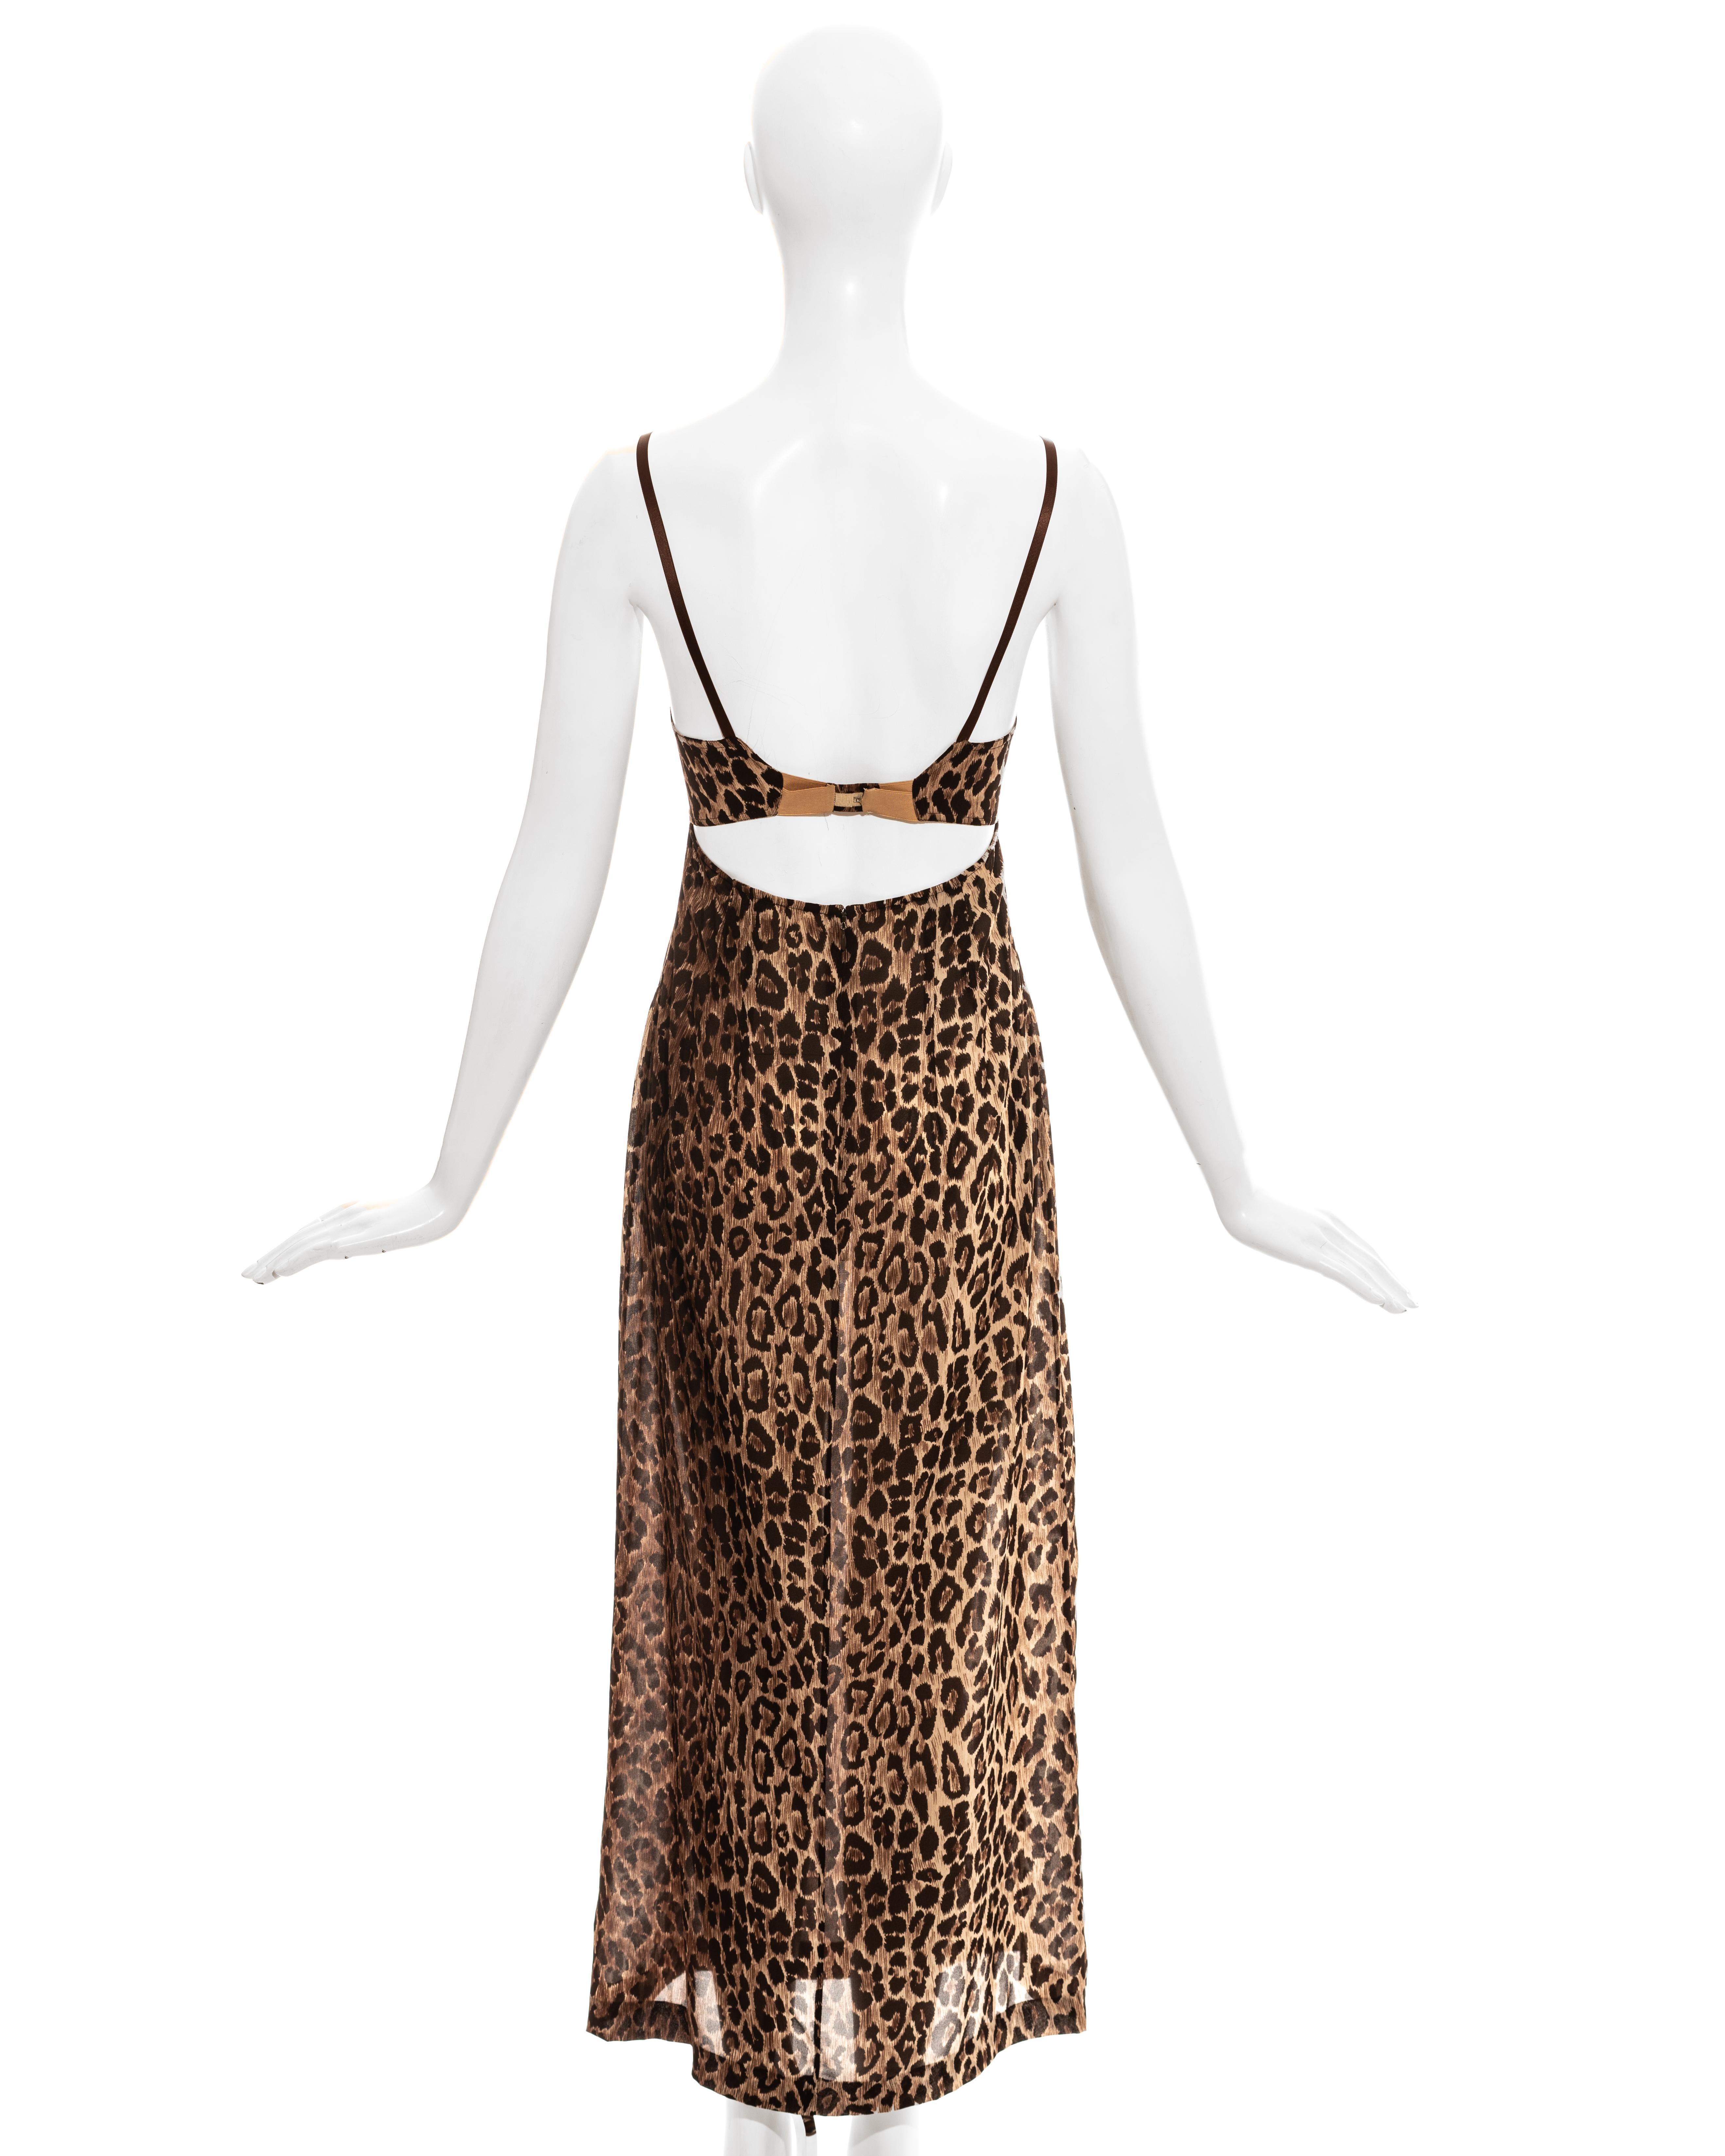 Dolce & Gabbana leopard print silk chiffon evening slip dress, ss 1997 In Excellent Condition For Sale In London, GB